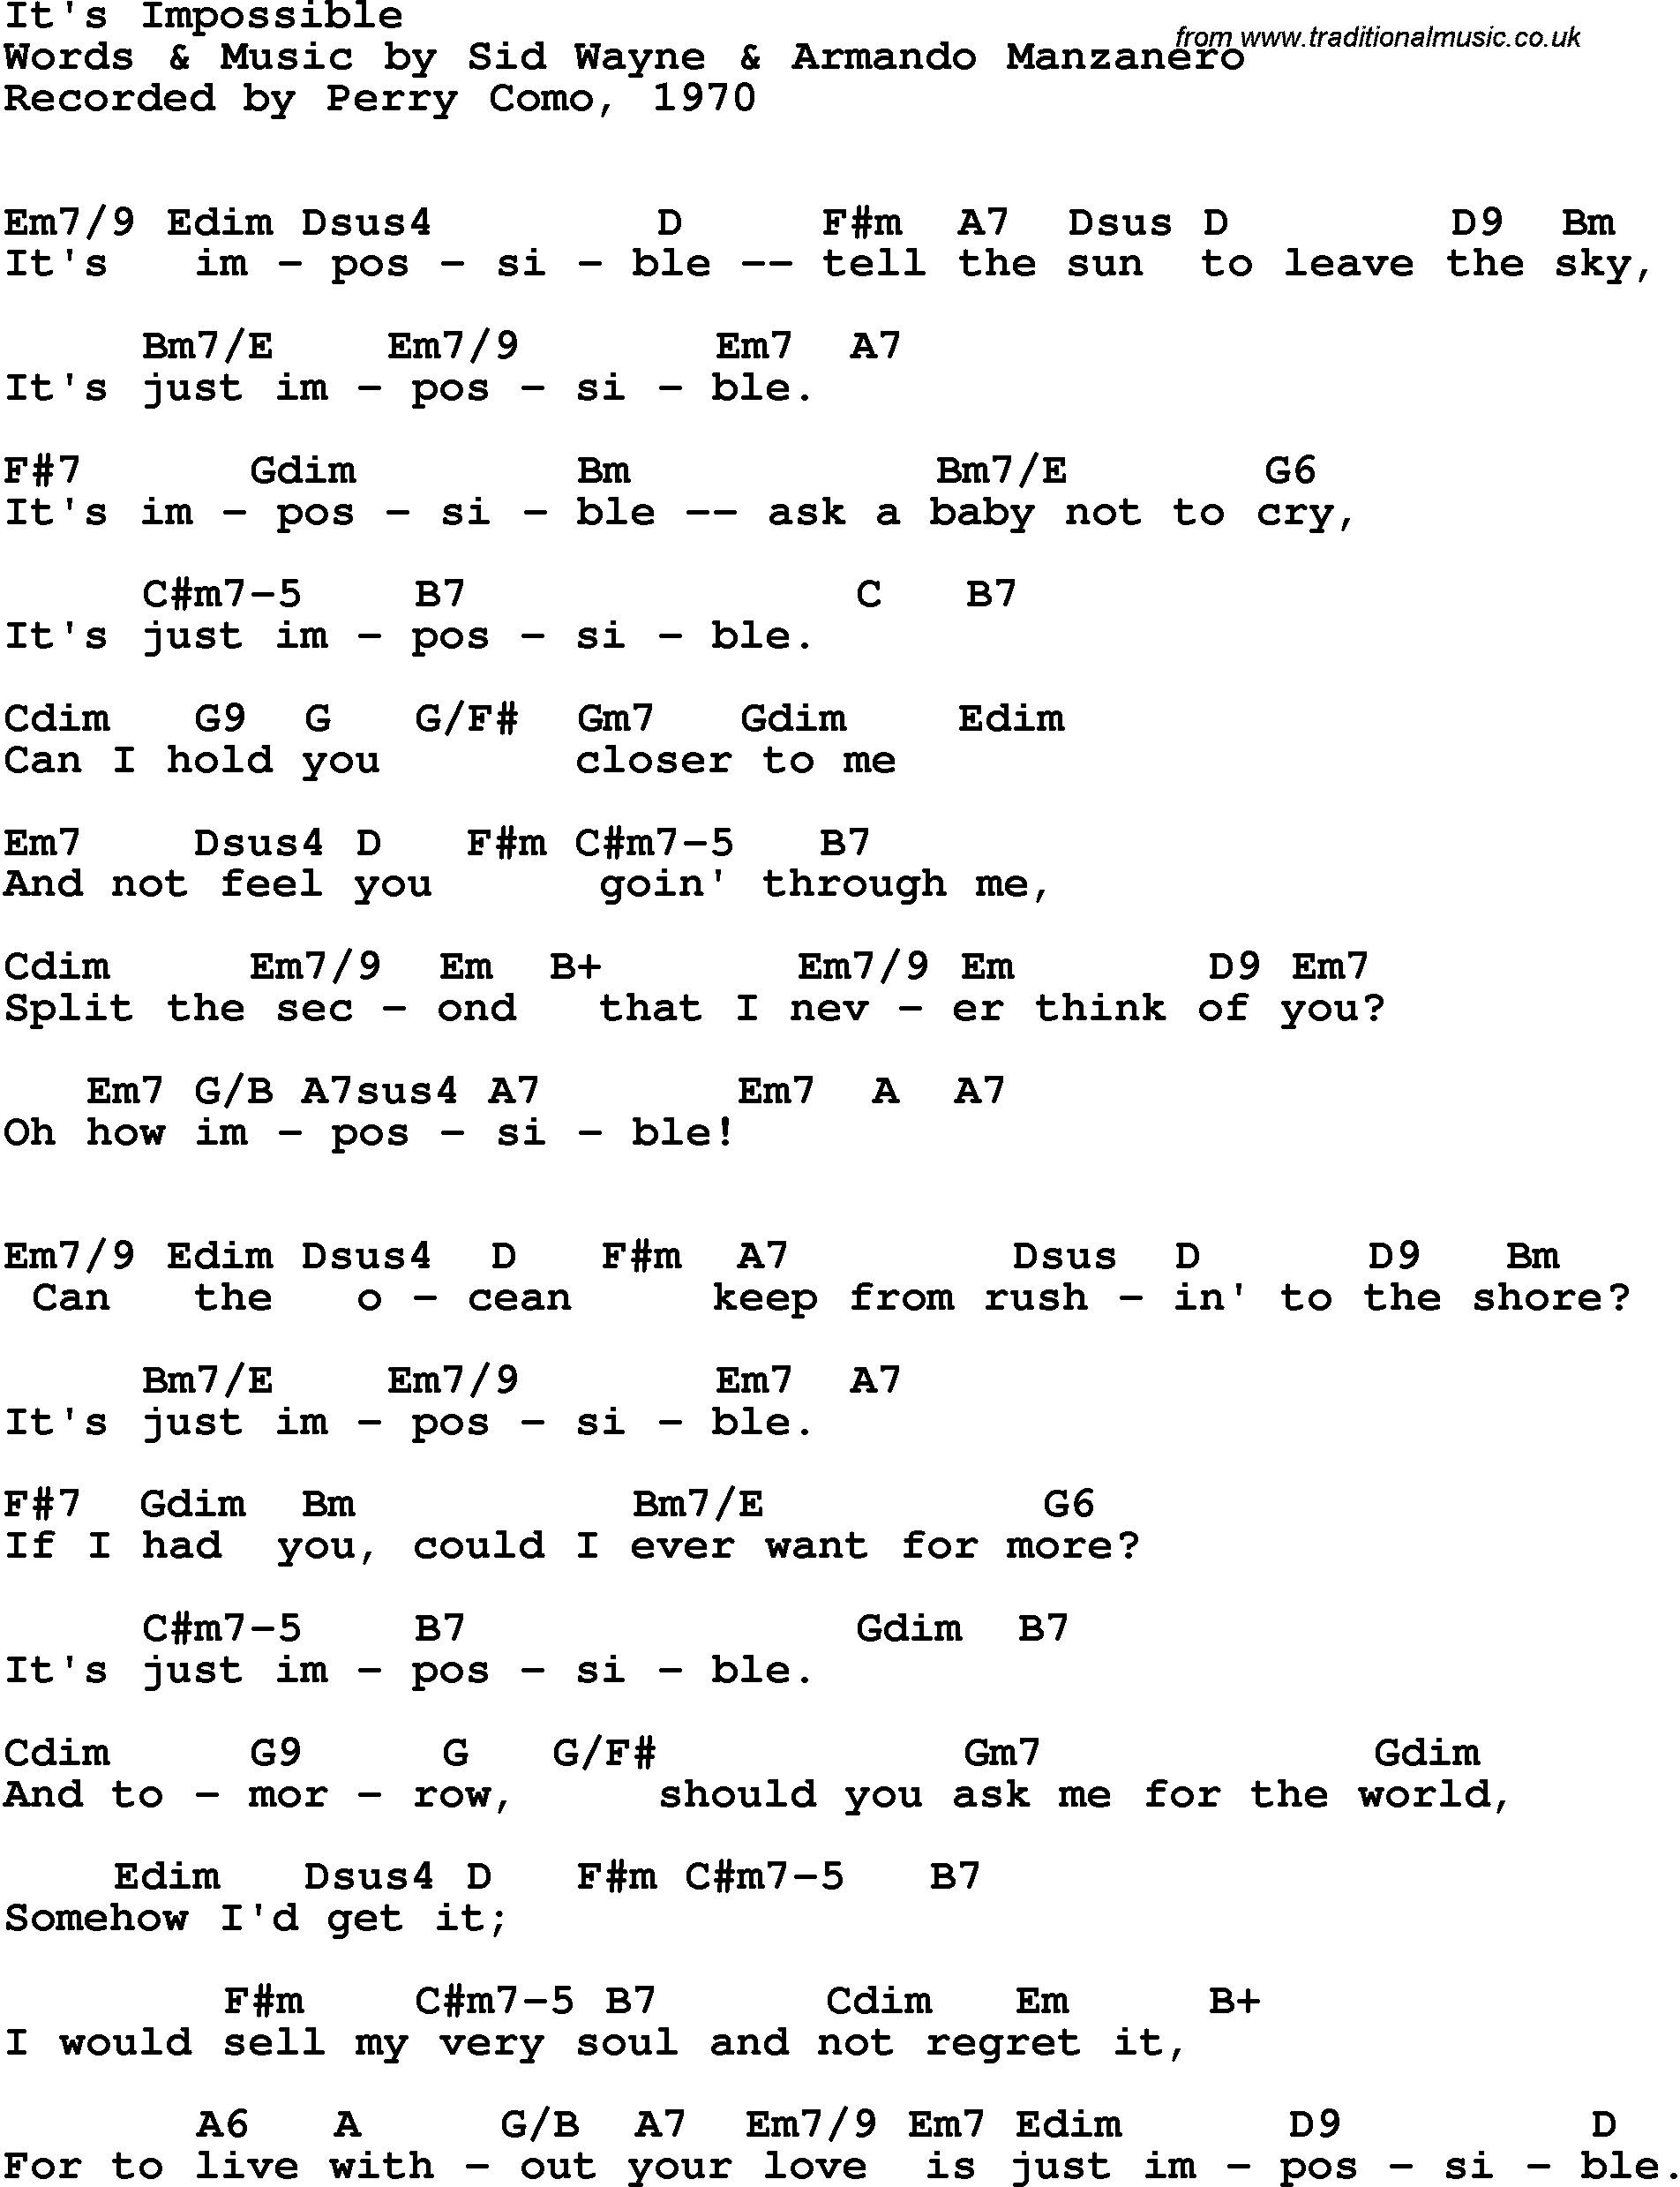 Song Lyrics with guitar chords for It's Impossible - Perry Como, 1970